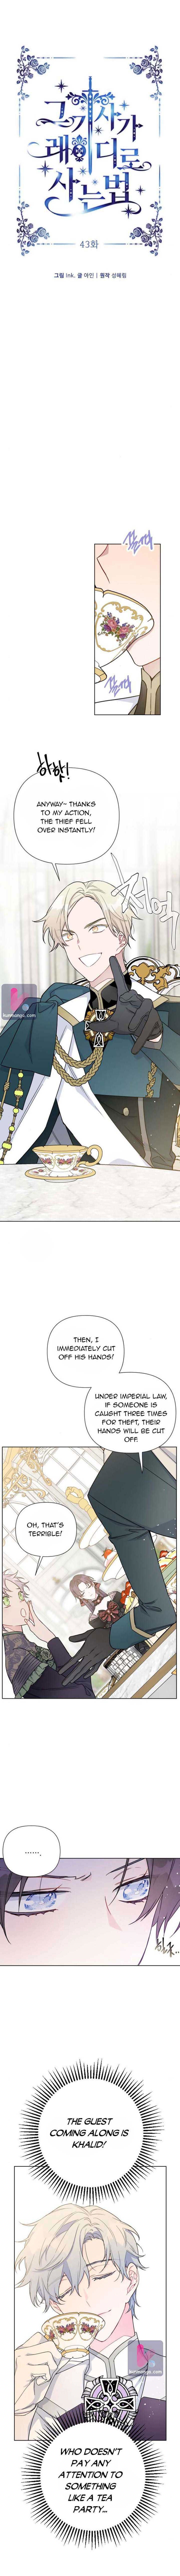 The Way That Knight Lives As a Lady Chapter 43 page 5